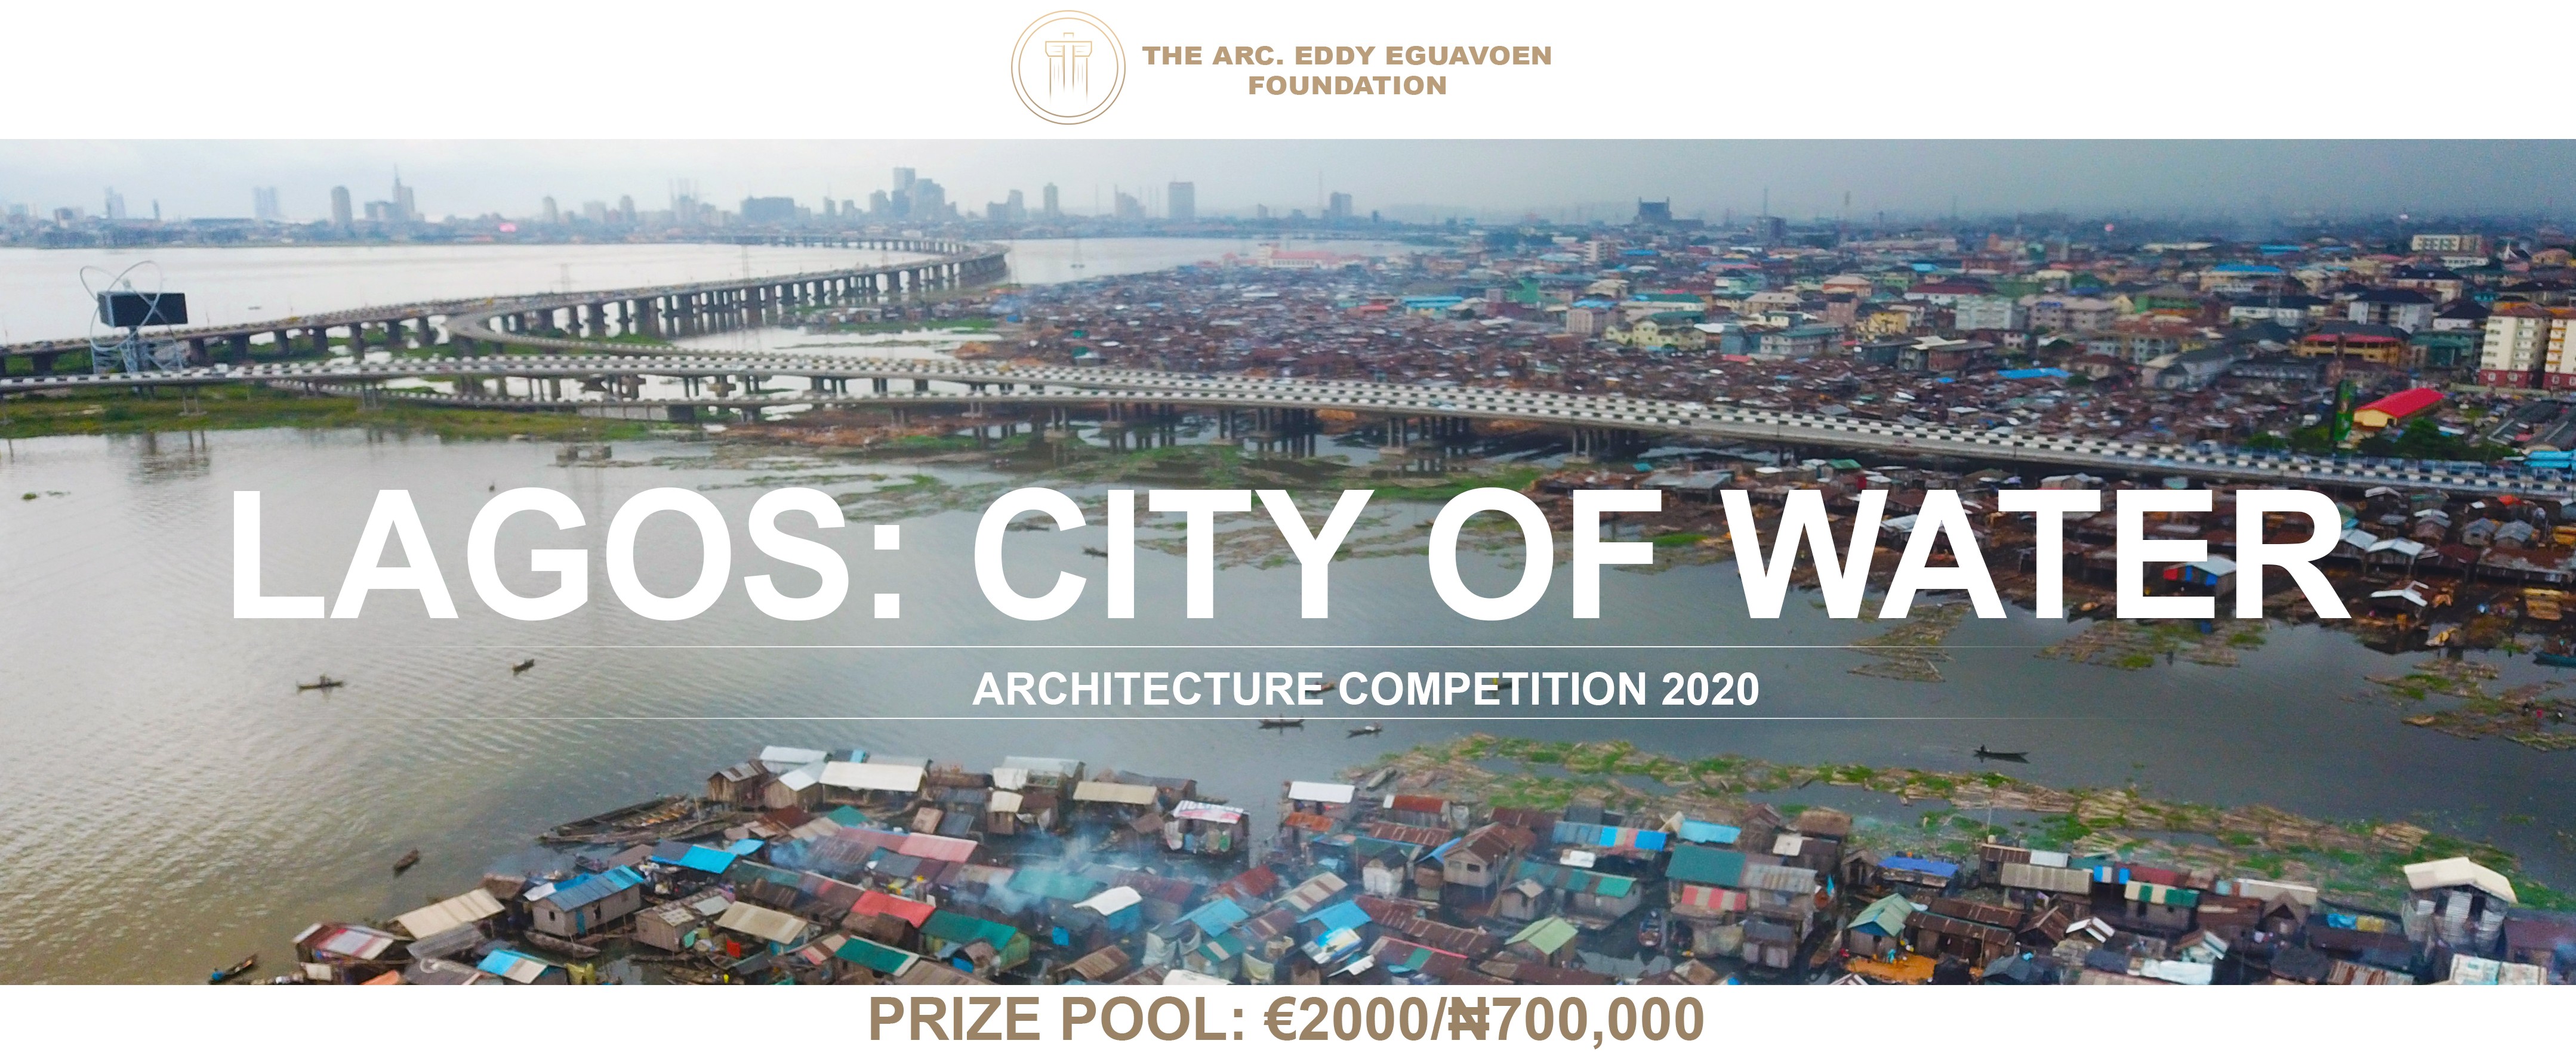 Lagos: City of Water Architecture Competition, Nigeria, 2020